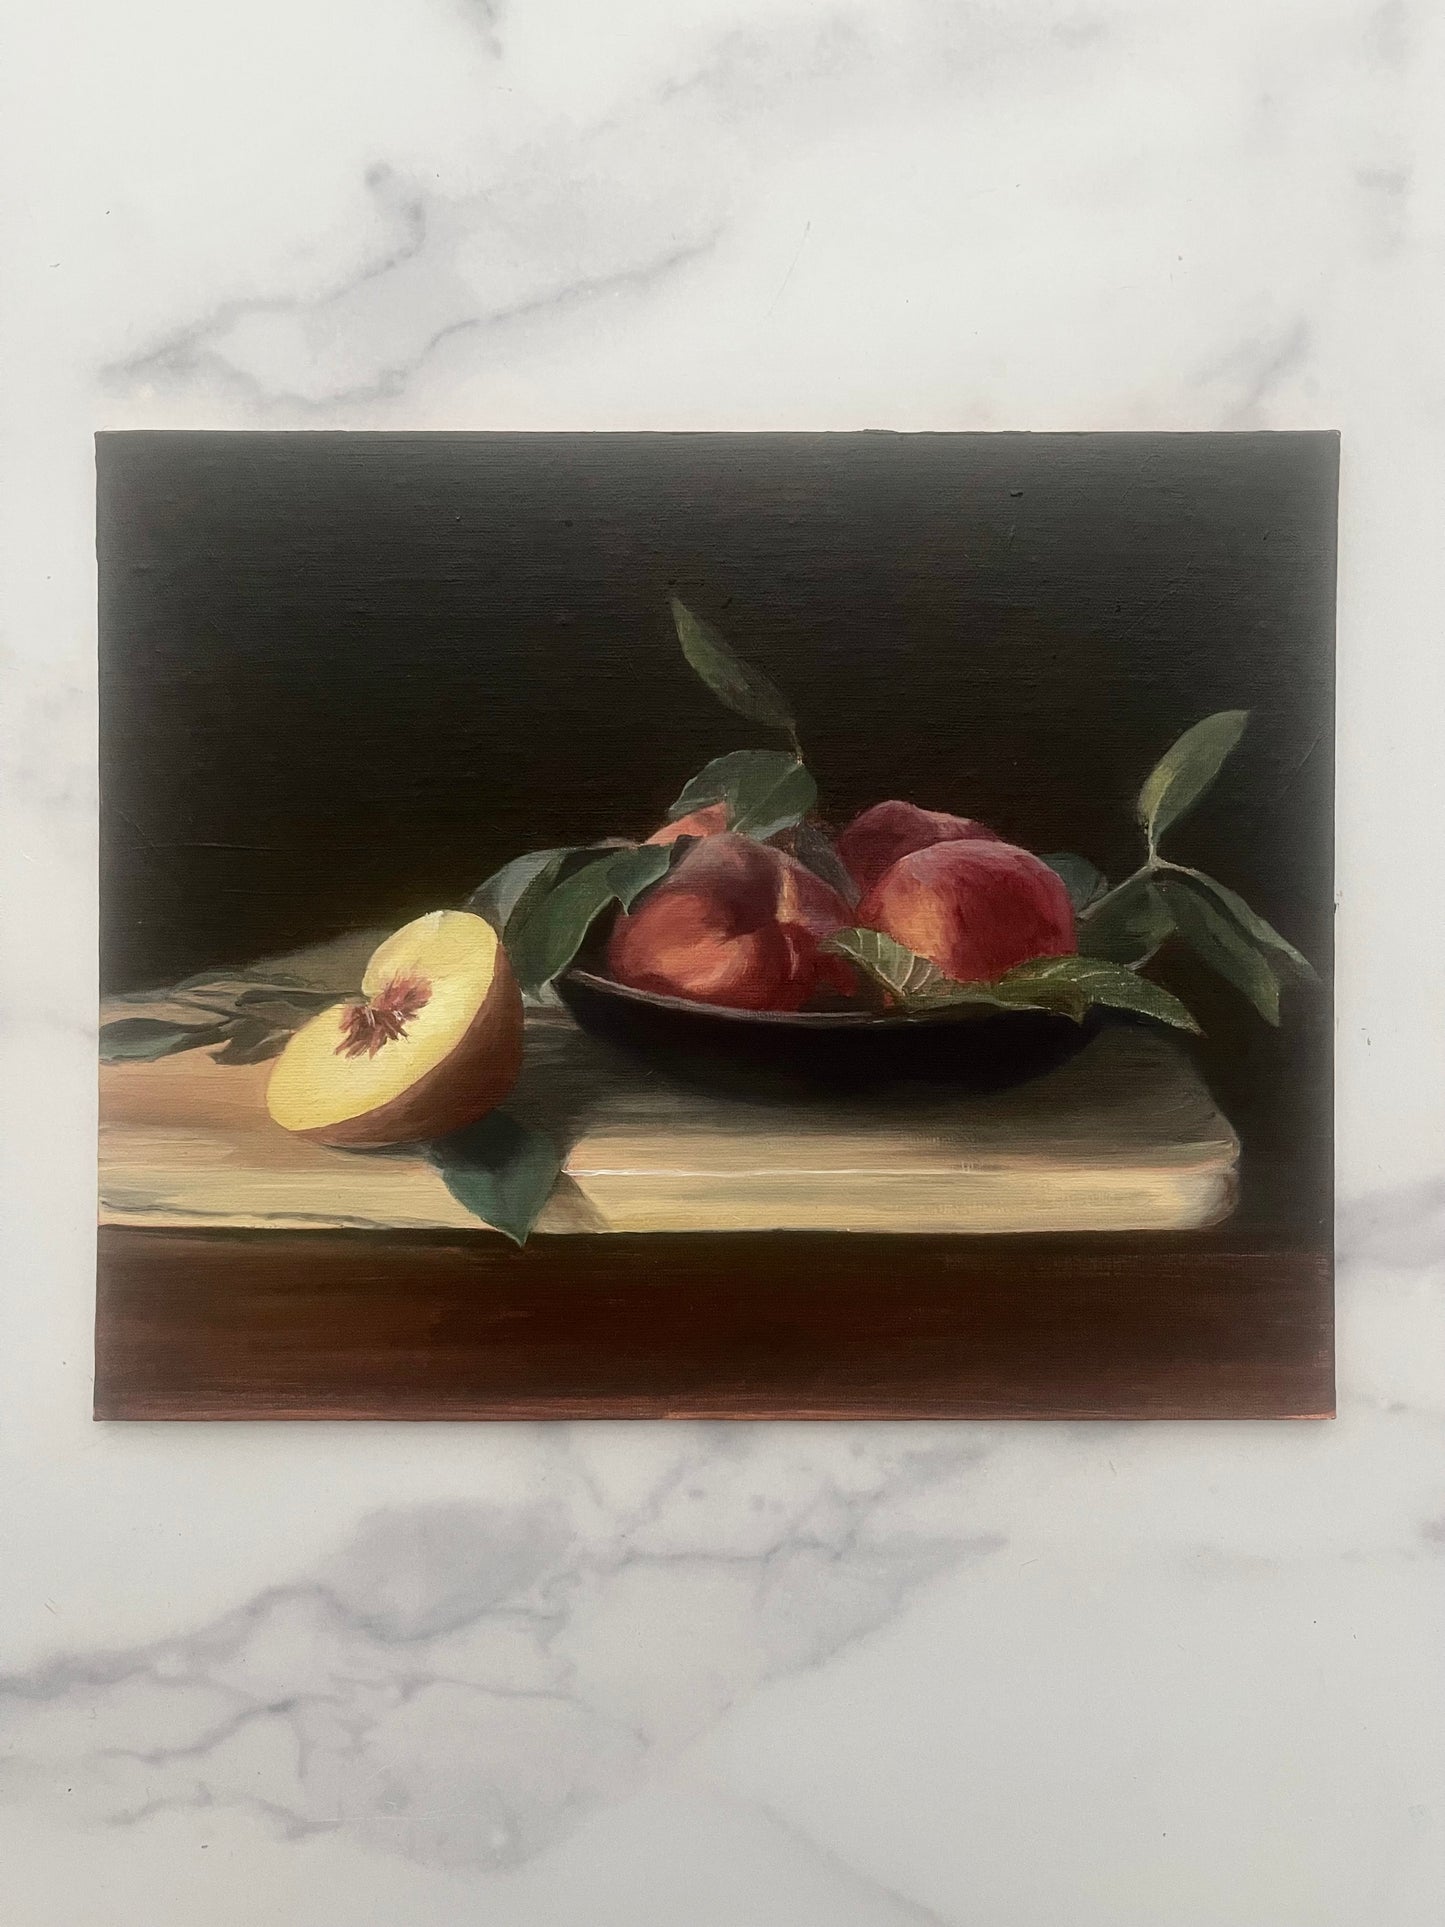 Painting for Julie - "Bowl of Peaches" - 8x10" oil on linen panel